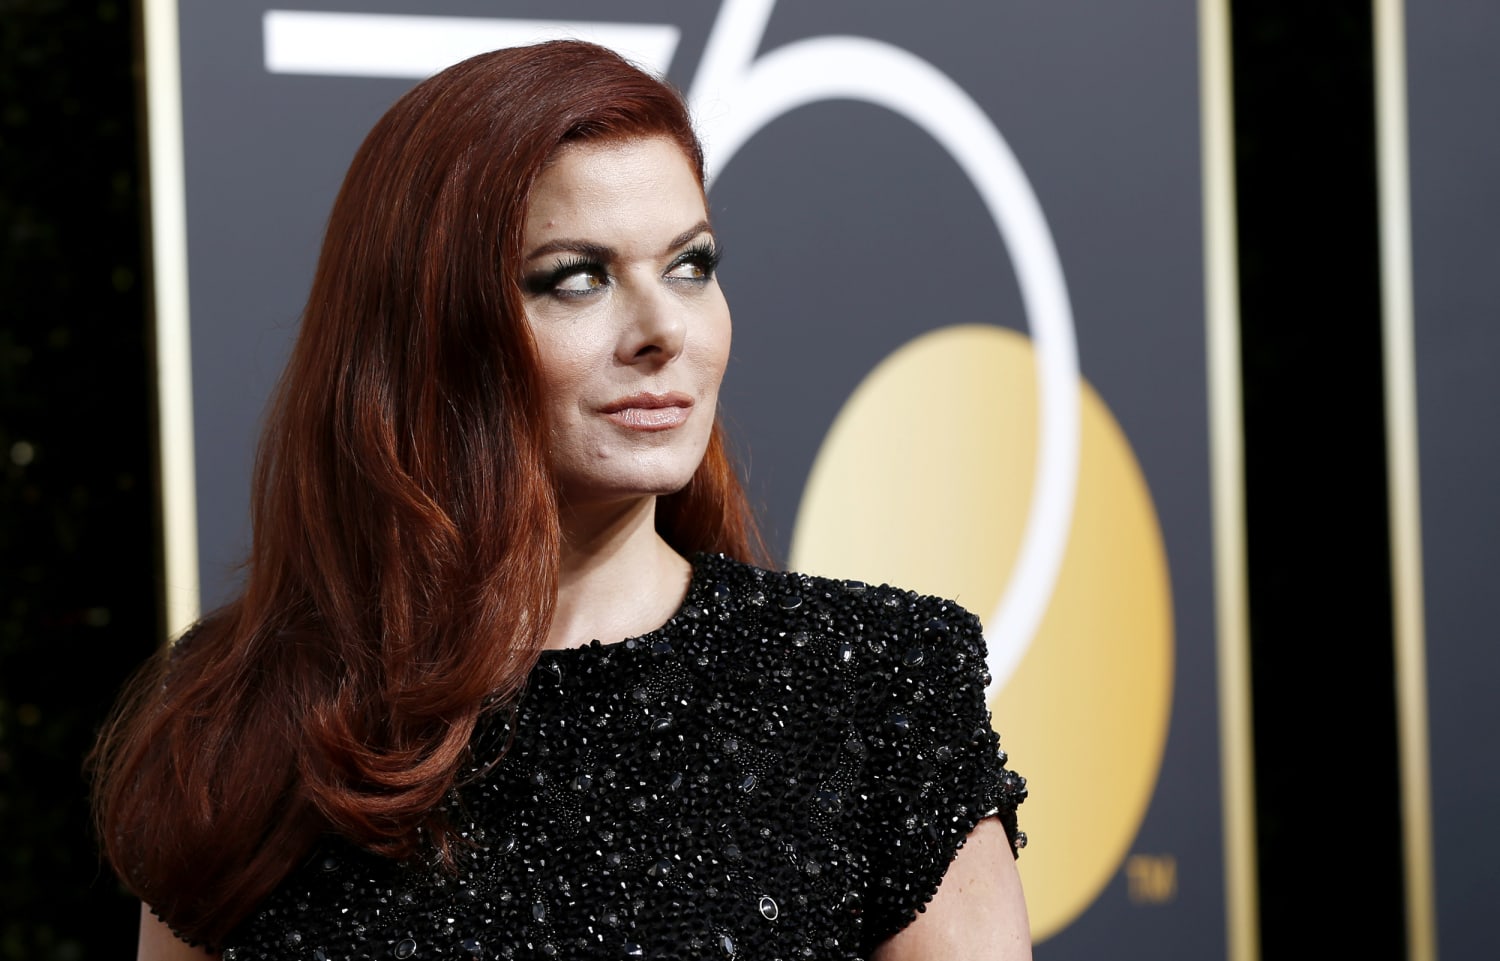 Debra Messing called for outing Trump supporters. Trump likened her to  McCarthy